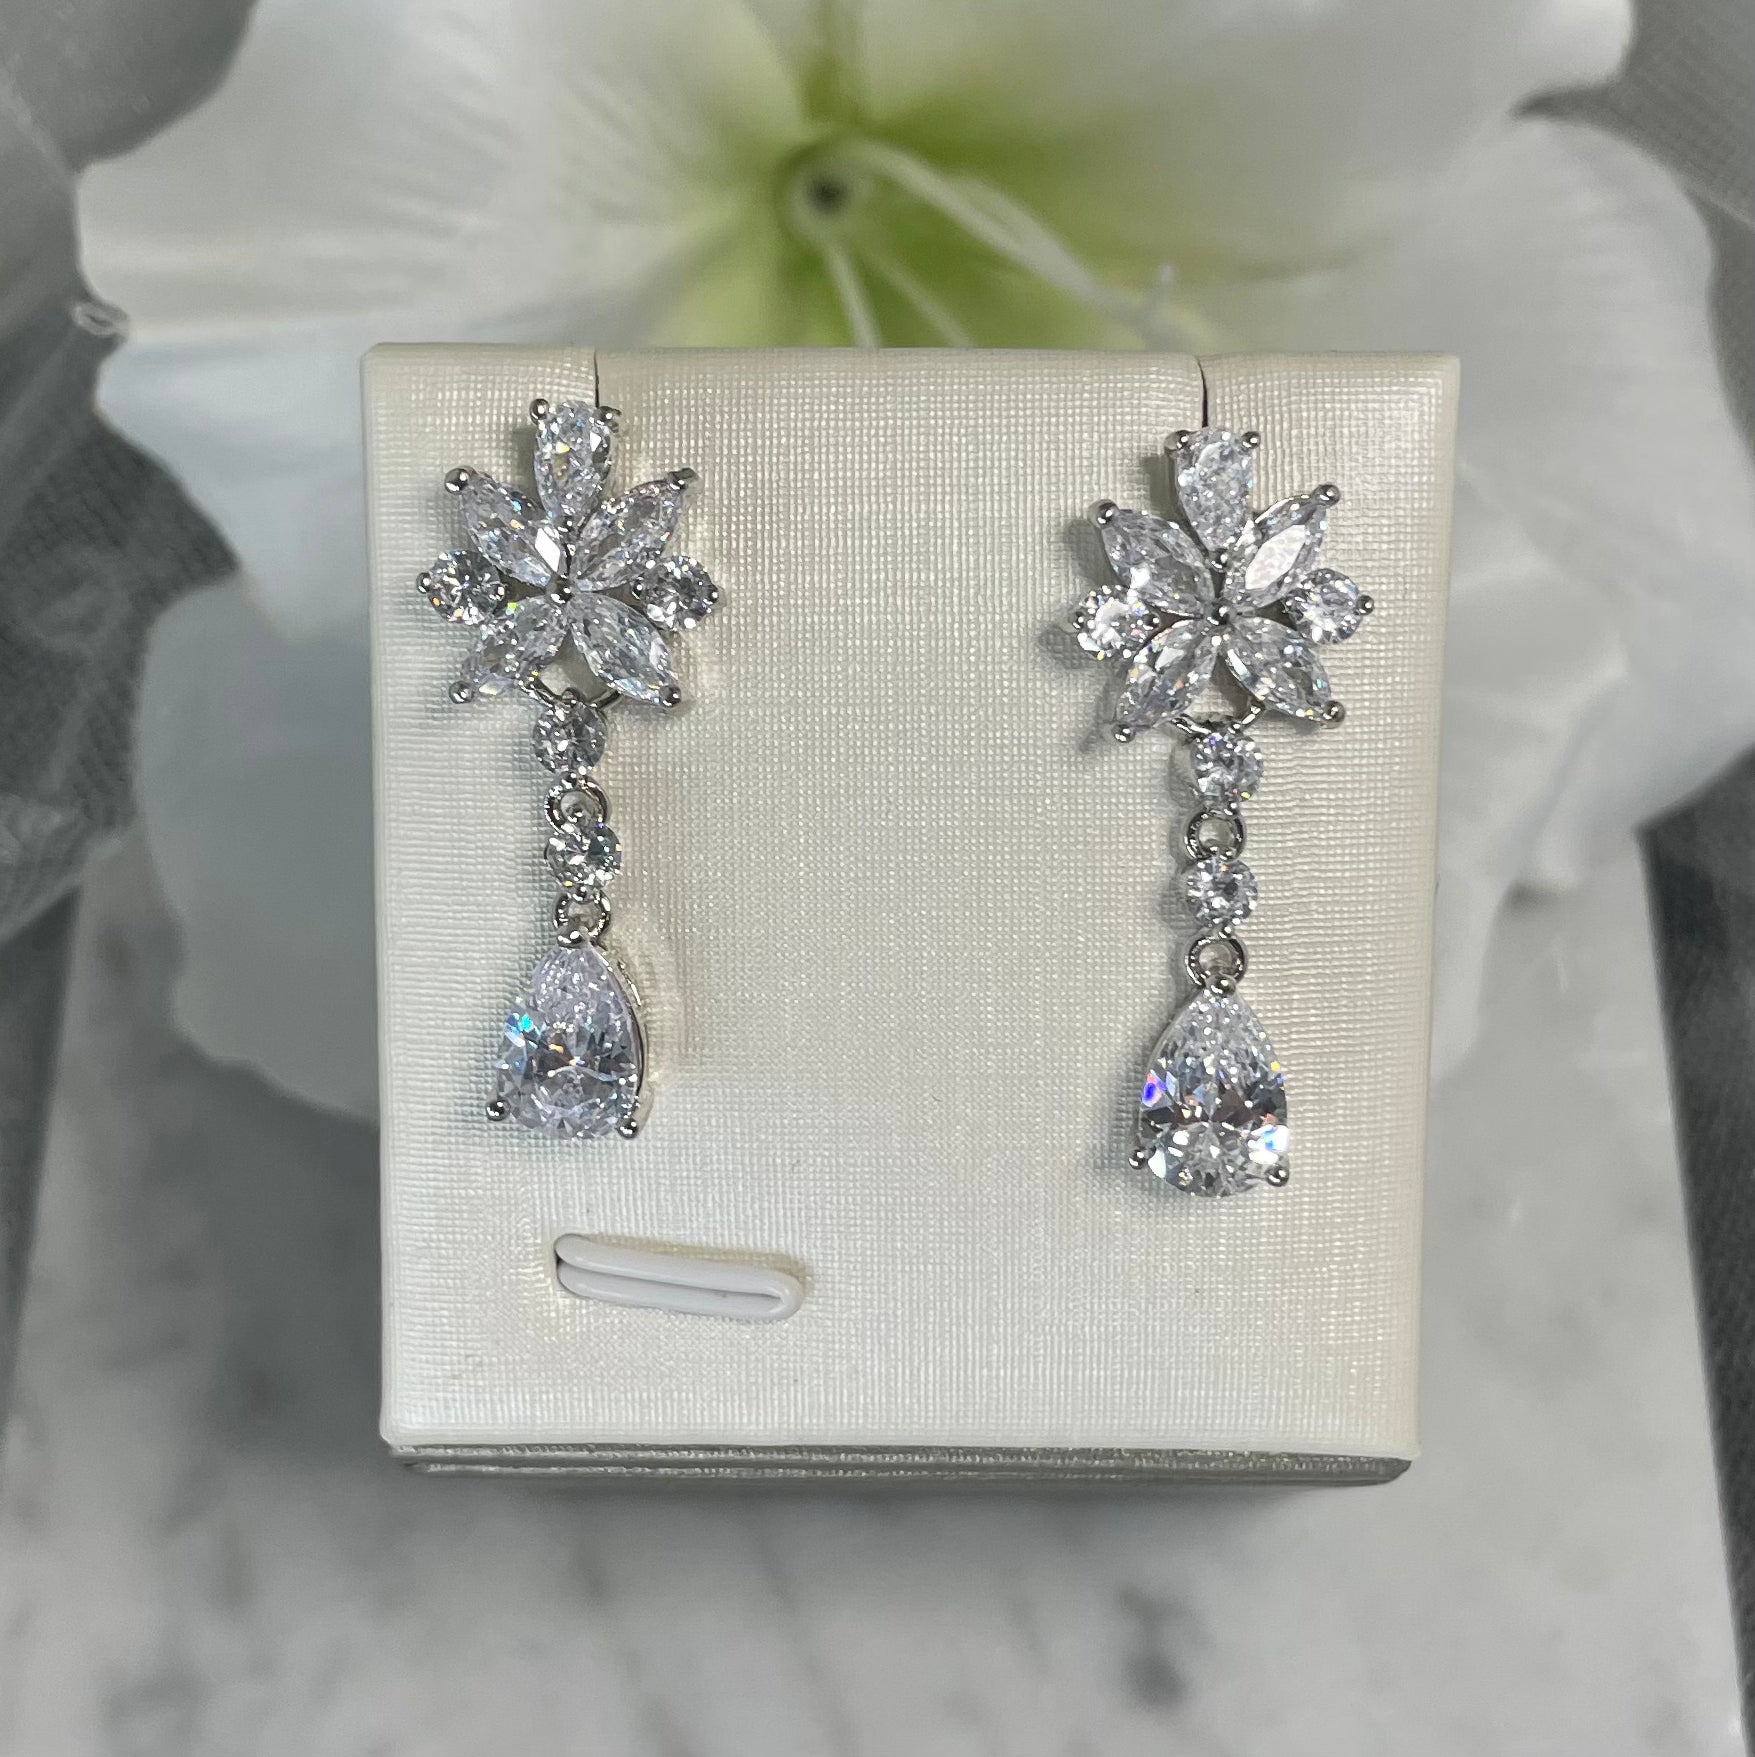 Christie cubic zirconia bridal earrings with a floral top, round crystals, and a teardrop finish, perfect for enhancing wedding day glamour.